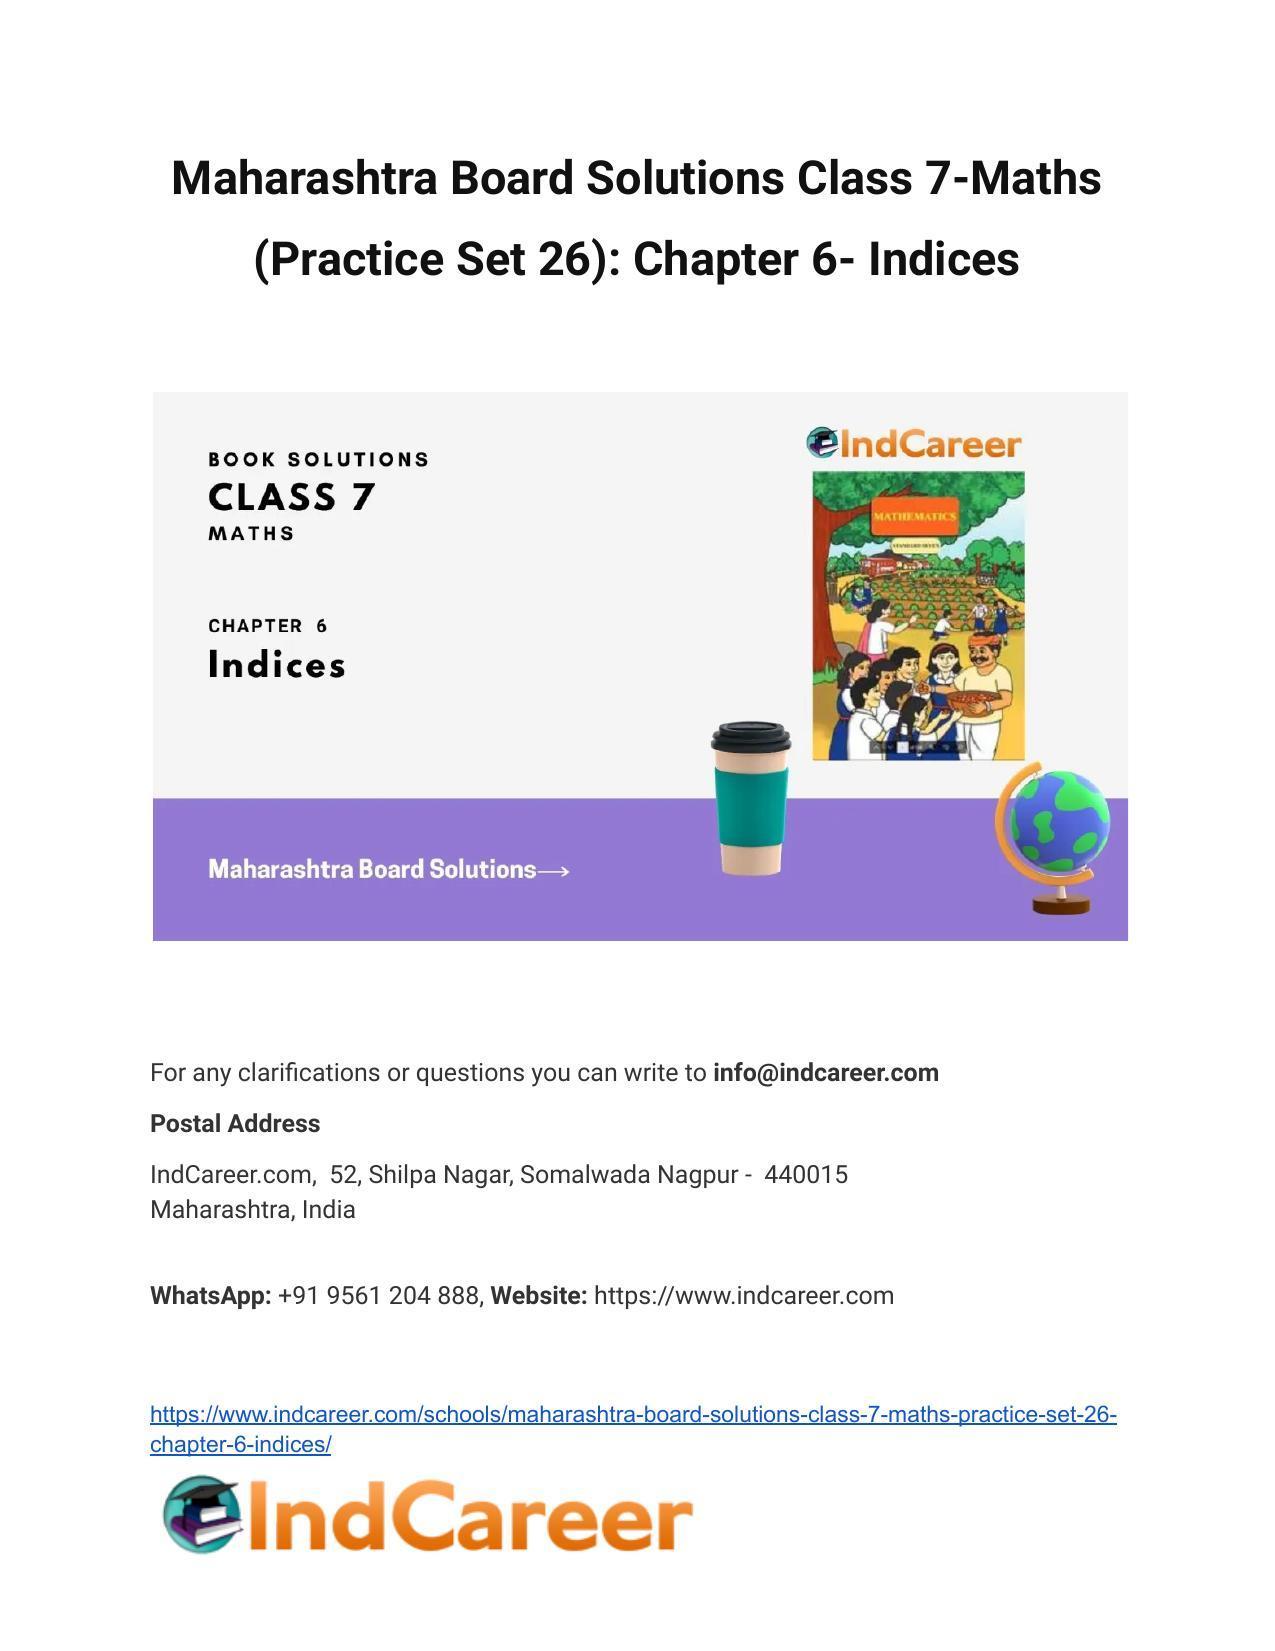 Maharashtra Board Solutions Class 7-Maths (Practice Set 26): Chapter 6- Indices - Page 1